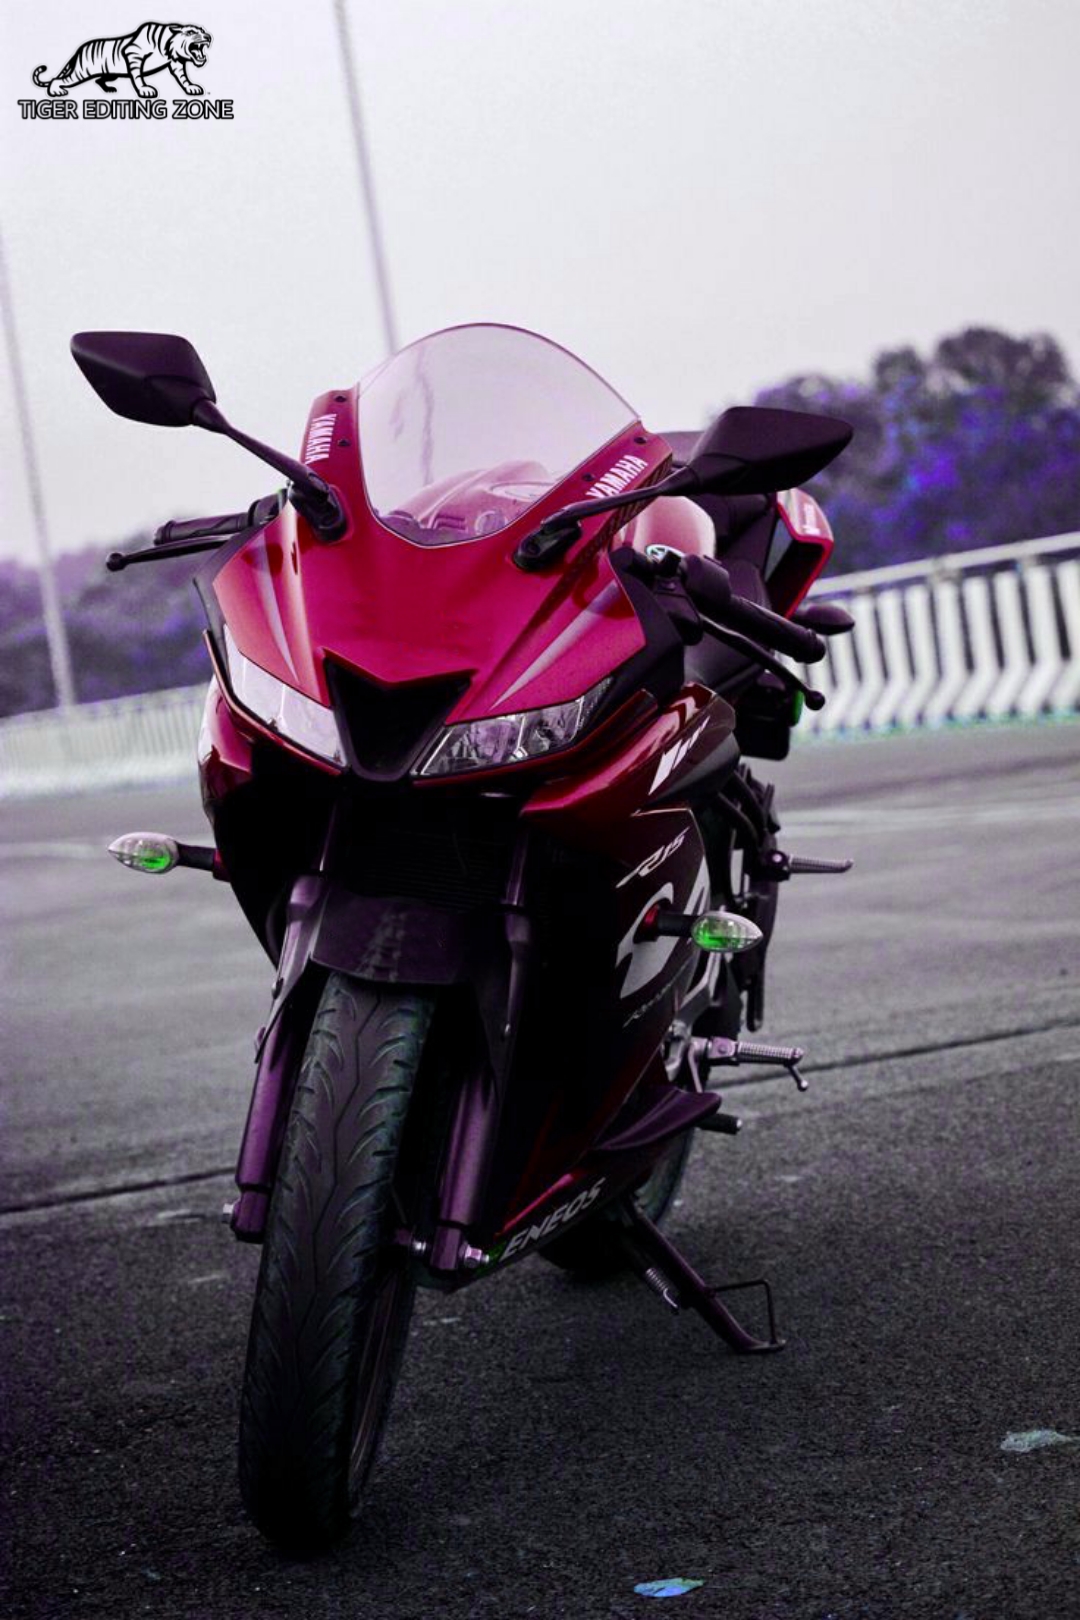 R15 Bike Editing Background Images Hd | R15 Bike Background For Editing